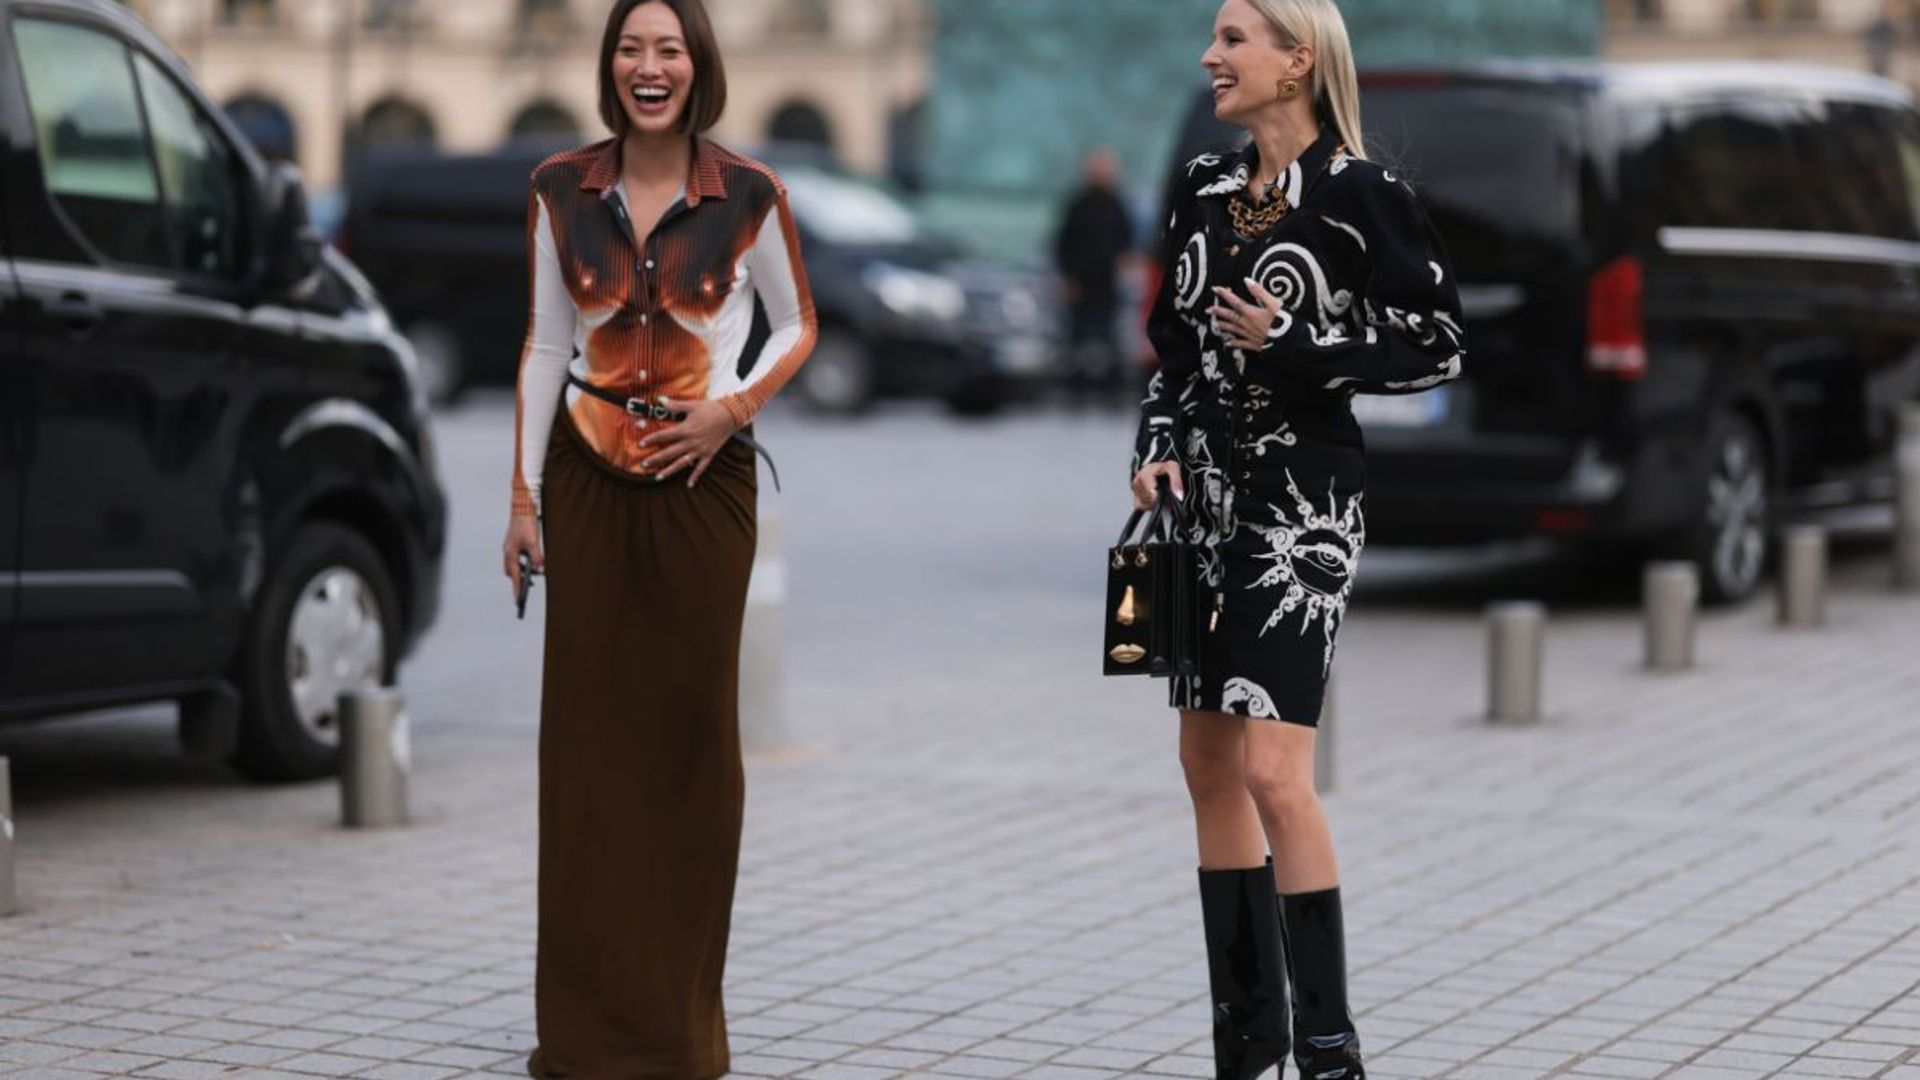 Give me five: the best 5 moments of PFW